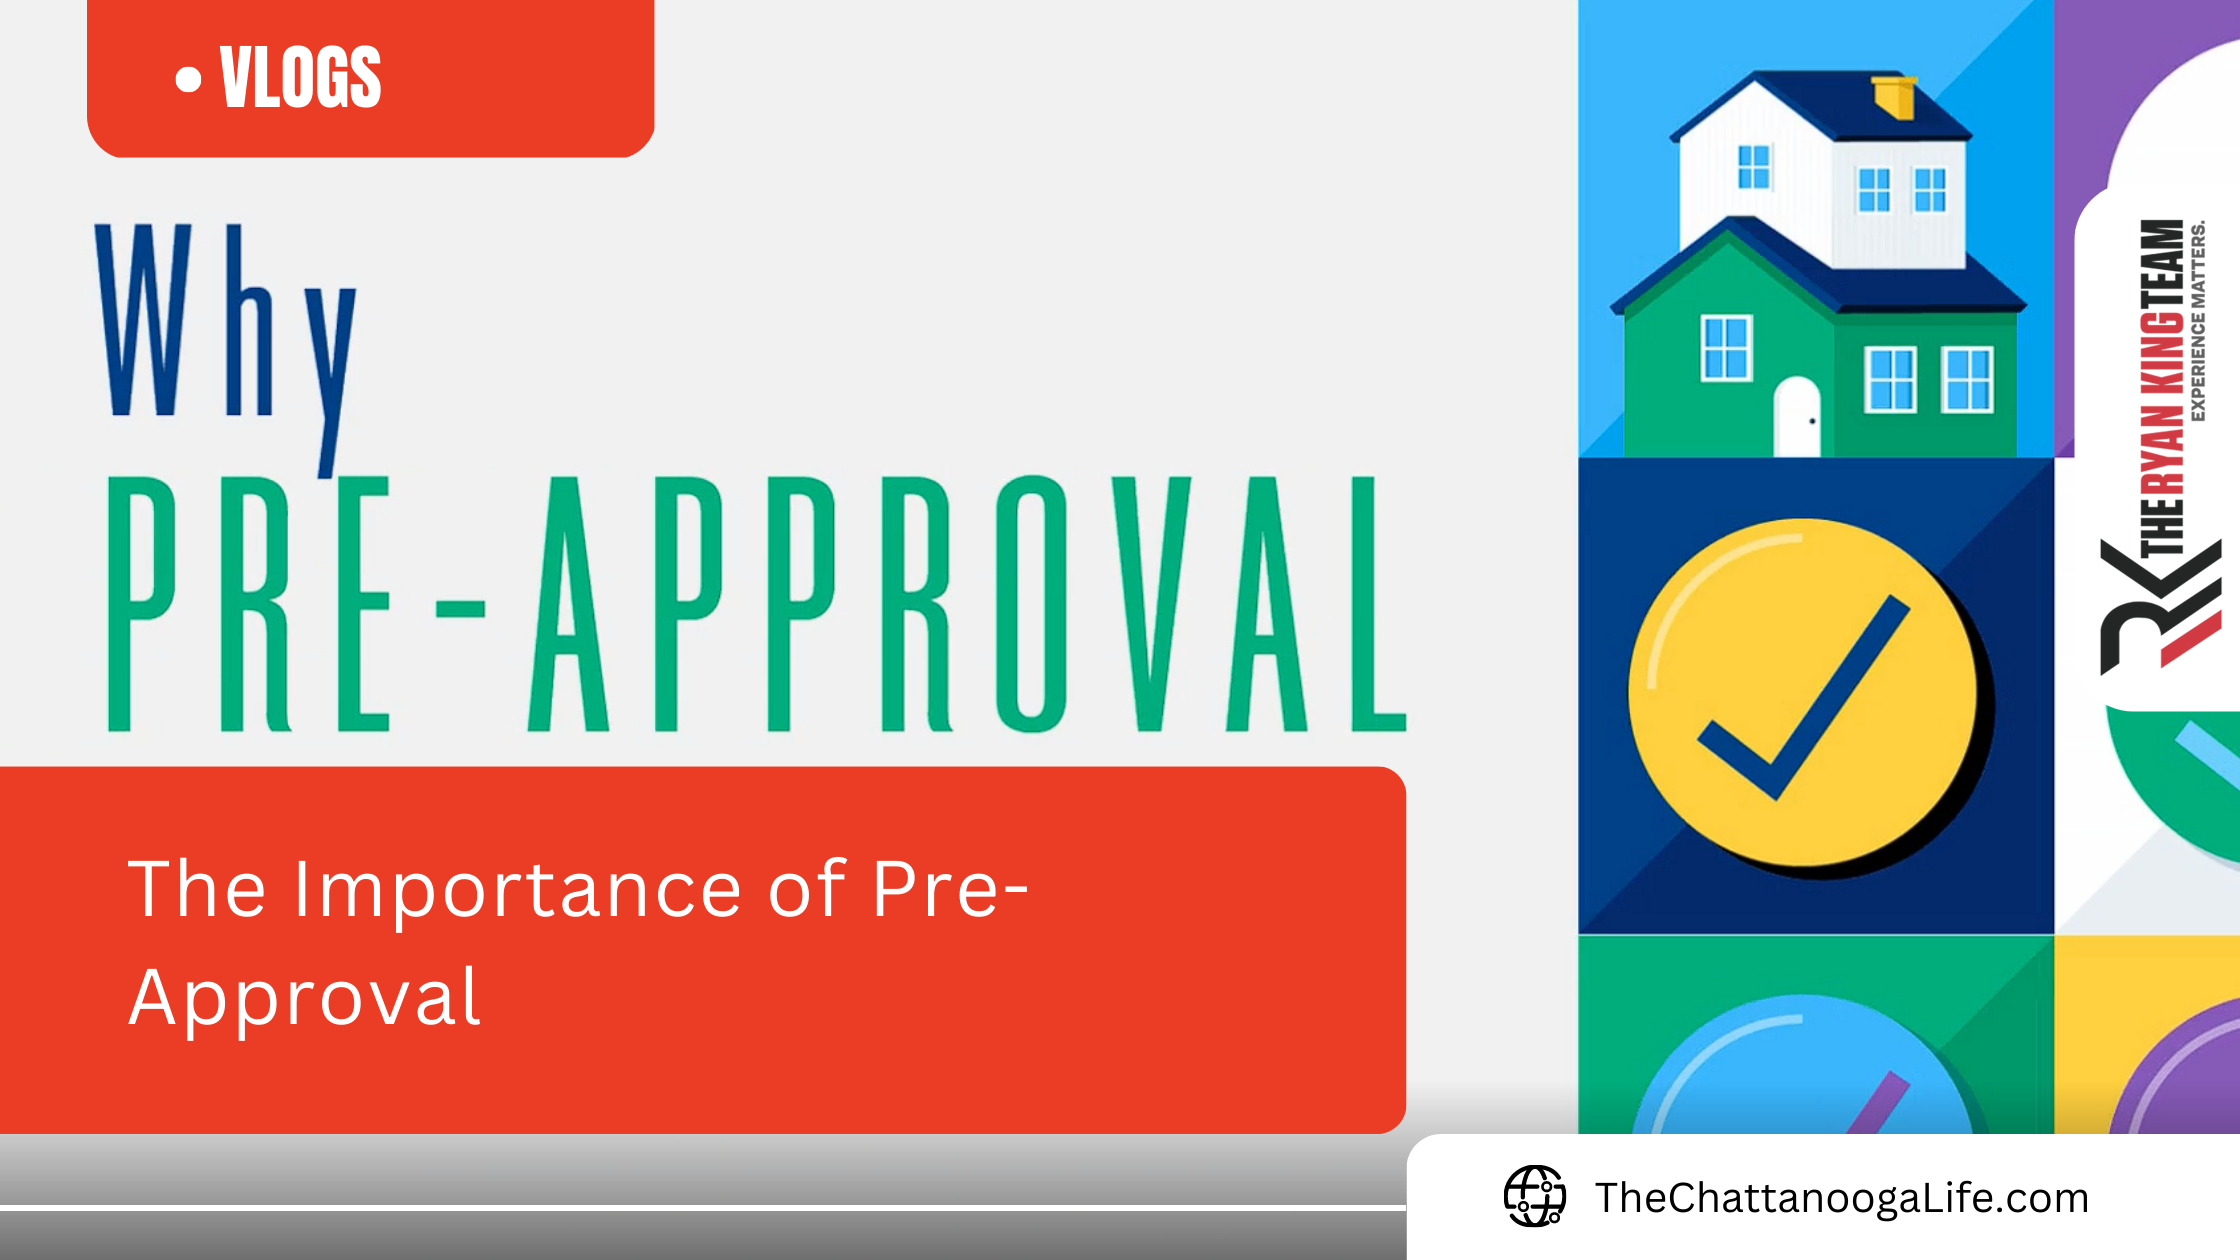 The Importance of Pre-Approval